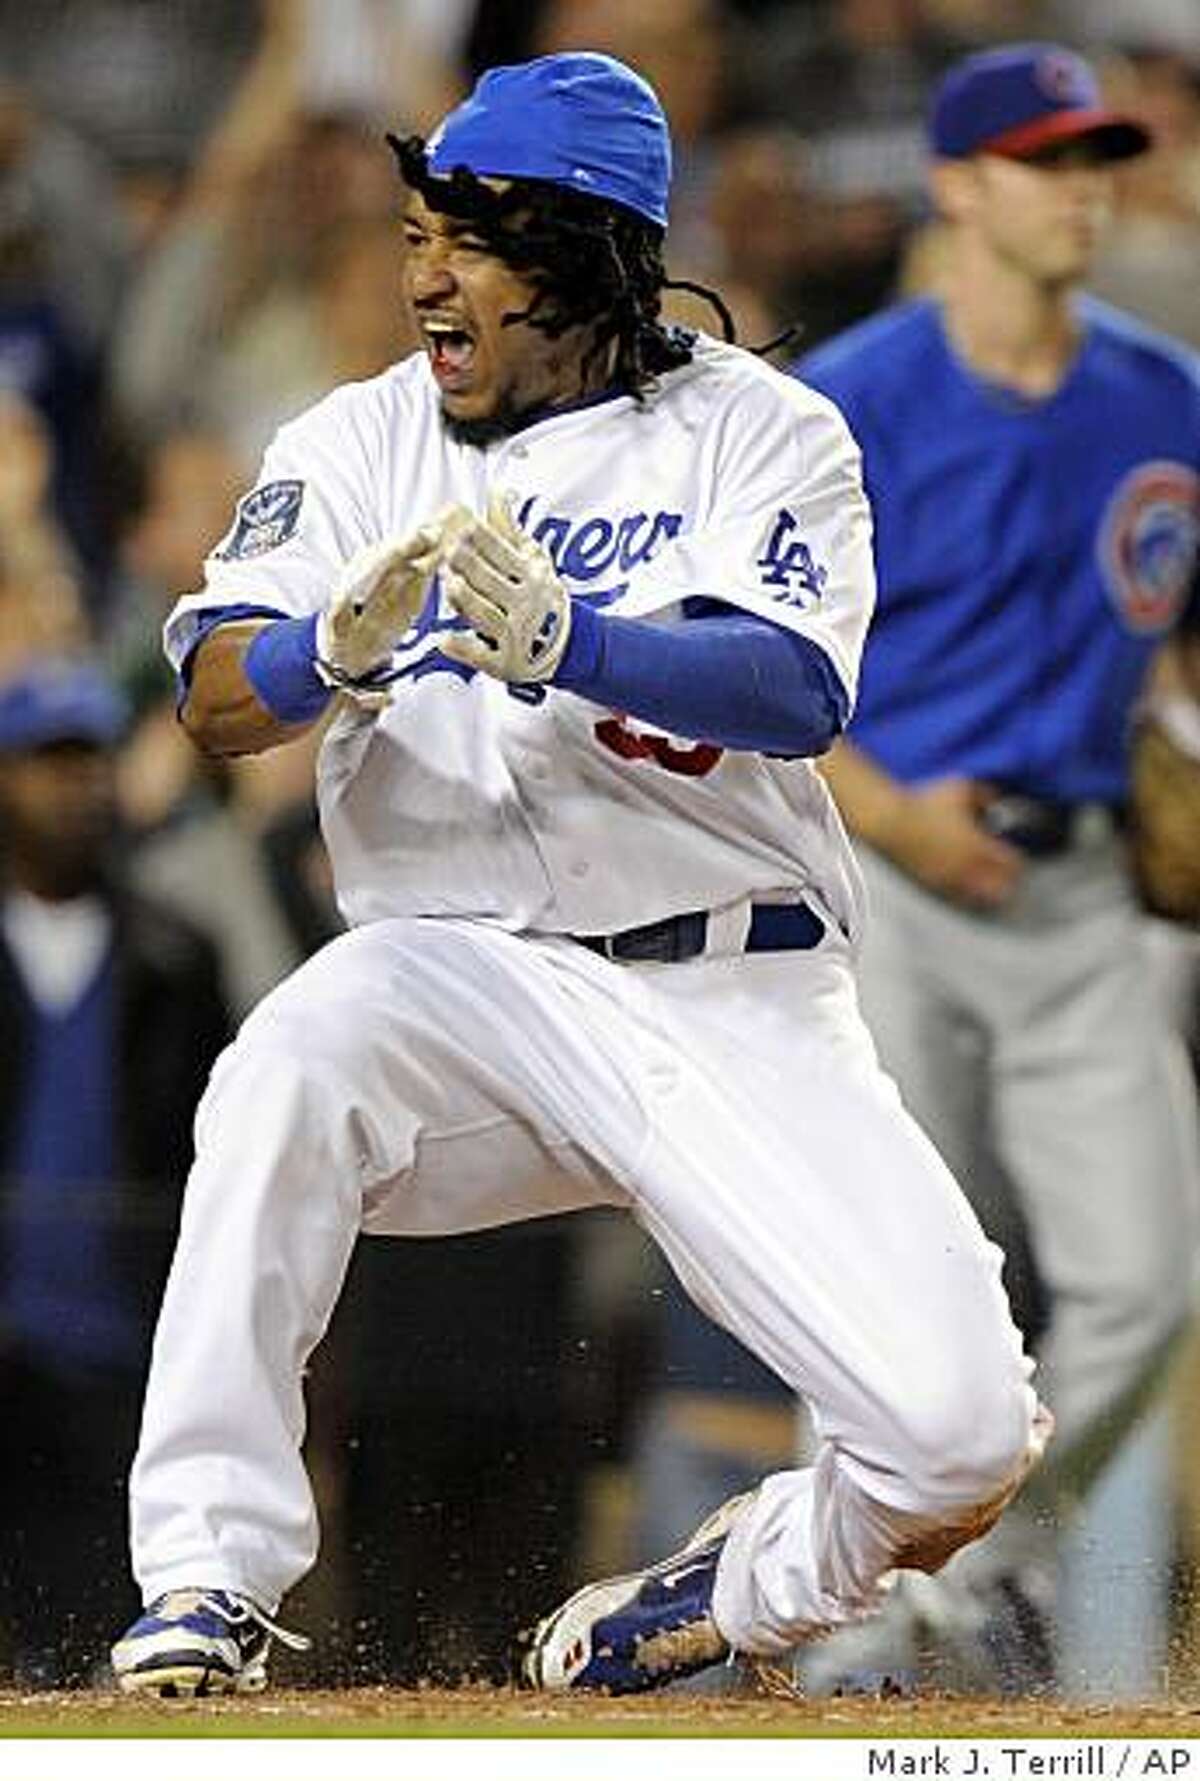 ** FILE ** In this Oct. 4, 2008 file photo, Los Angeles Dodgers' Manny Ramirez reacts after sliding safely into home to score on a two-run double by James Loney during the first inning of Game 3 of baseball's National League division series in Los Angeles, Calif. Ramirez and the Dodgers open the best-of-seven NL championship series against the Philadelphia Phillies, Thursday, Oct. 9, 2008 in Philadelphia. (AP Photo/Mark J. Terril, Fie)